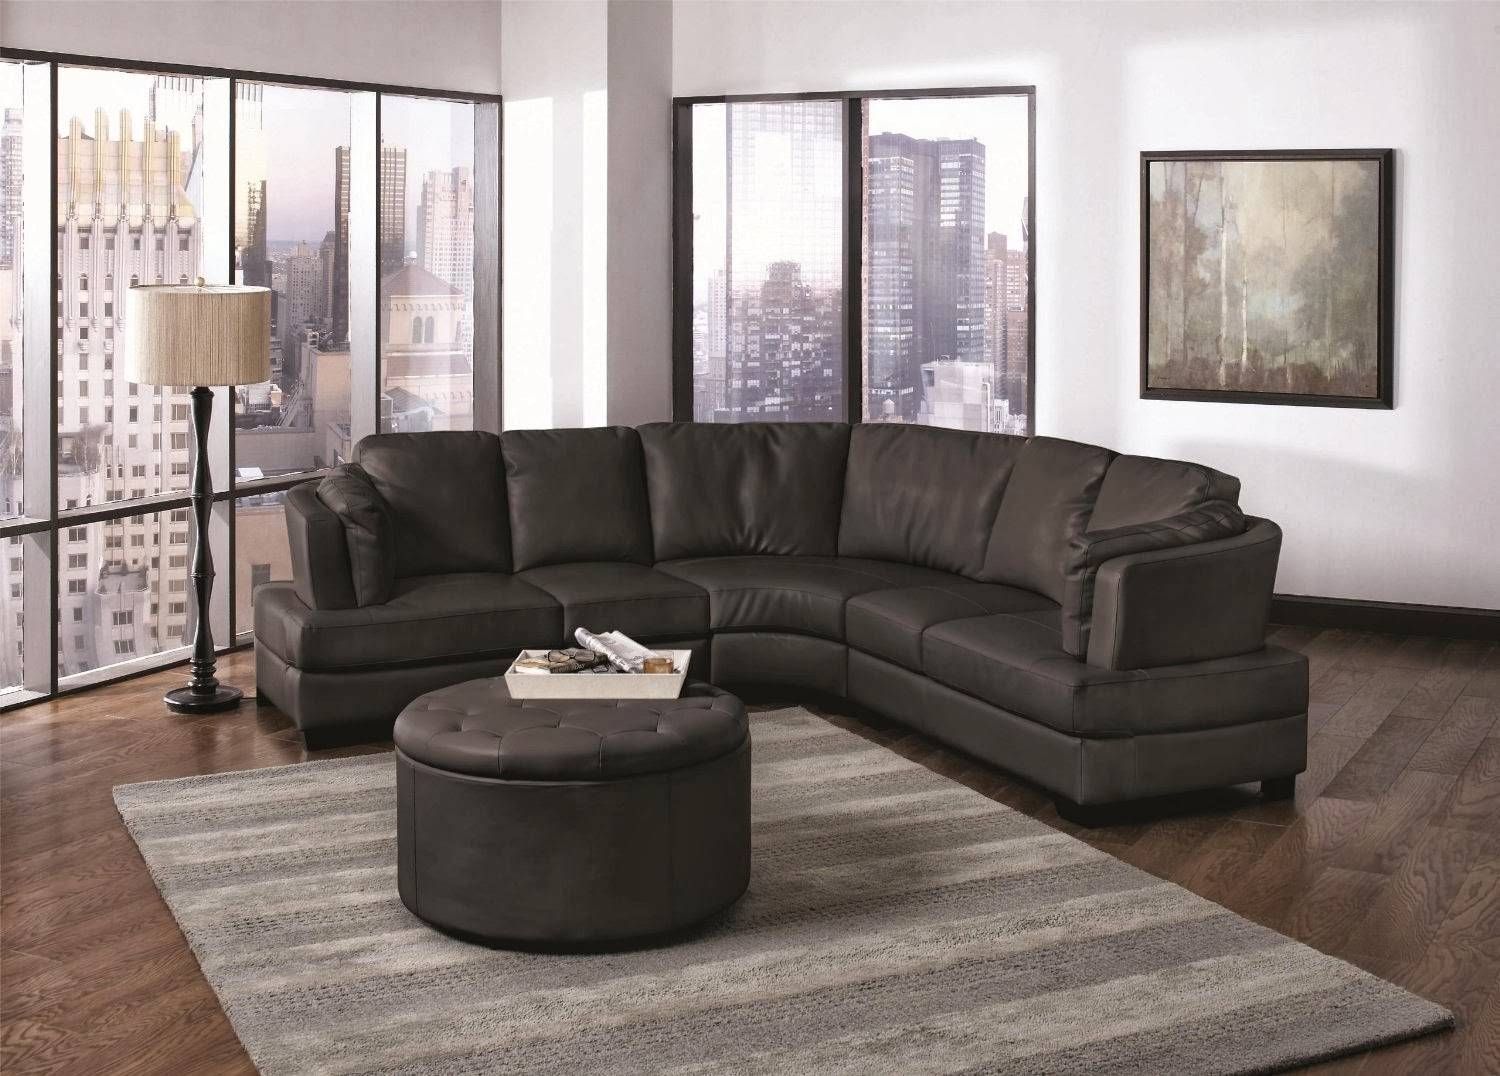 Enchanting Curved Sectional Sofa With Recliner 44 With Additional With Regard To Curved Sectional Sofas With Recliner (View 11 of 15)